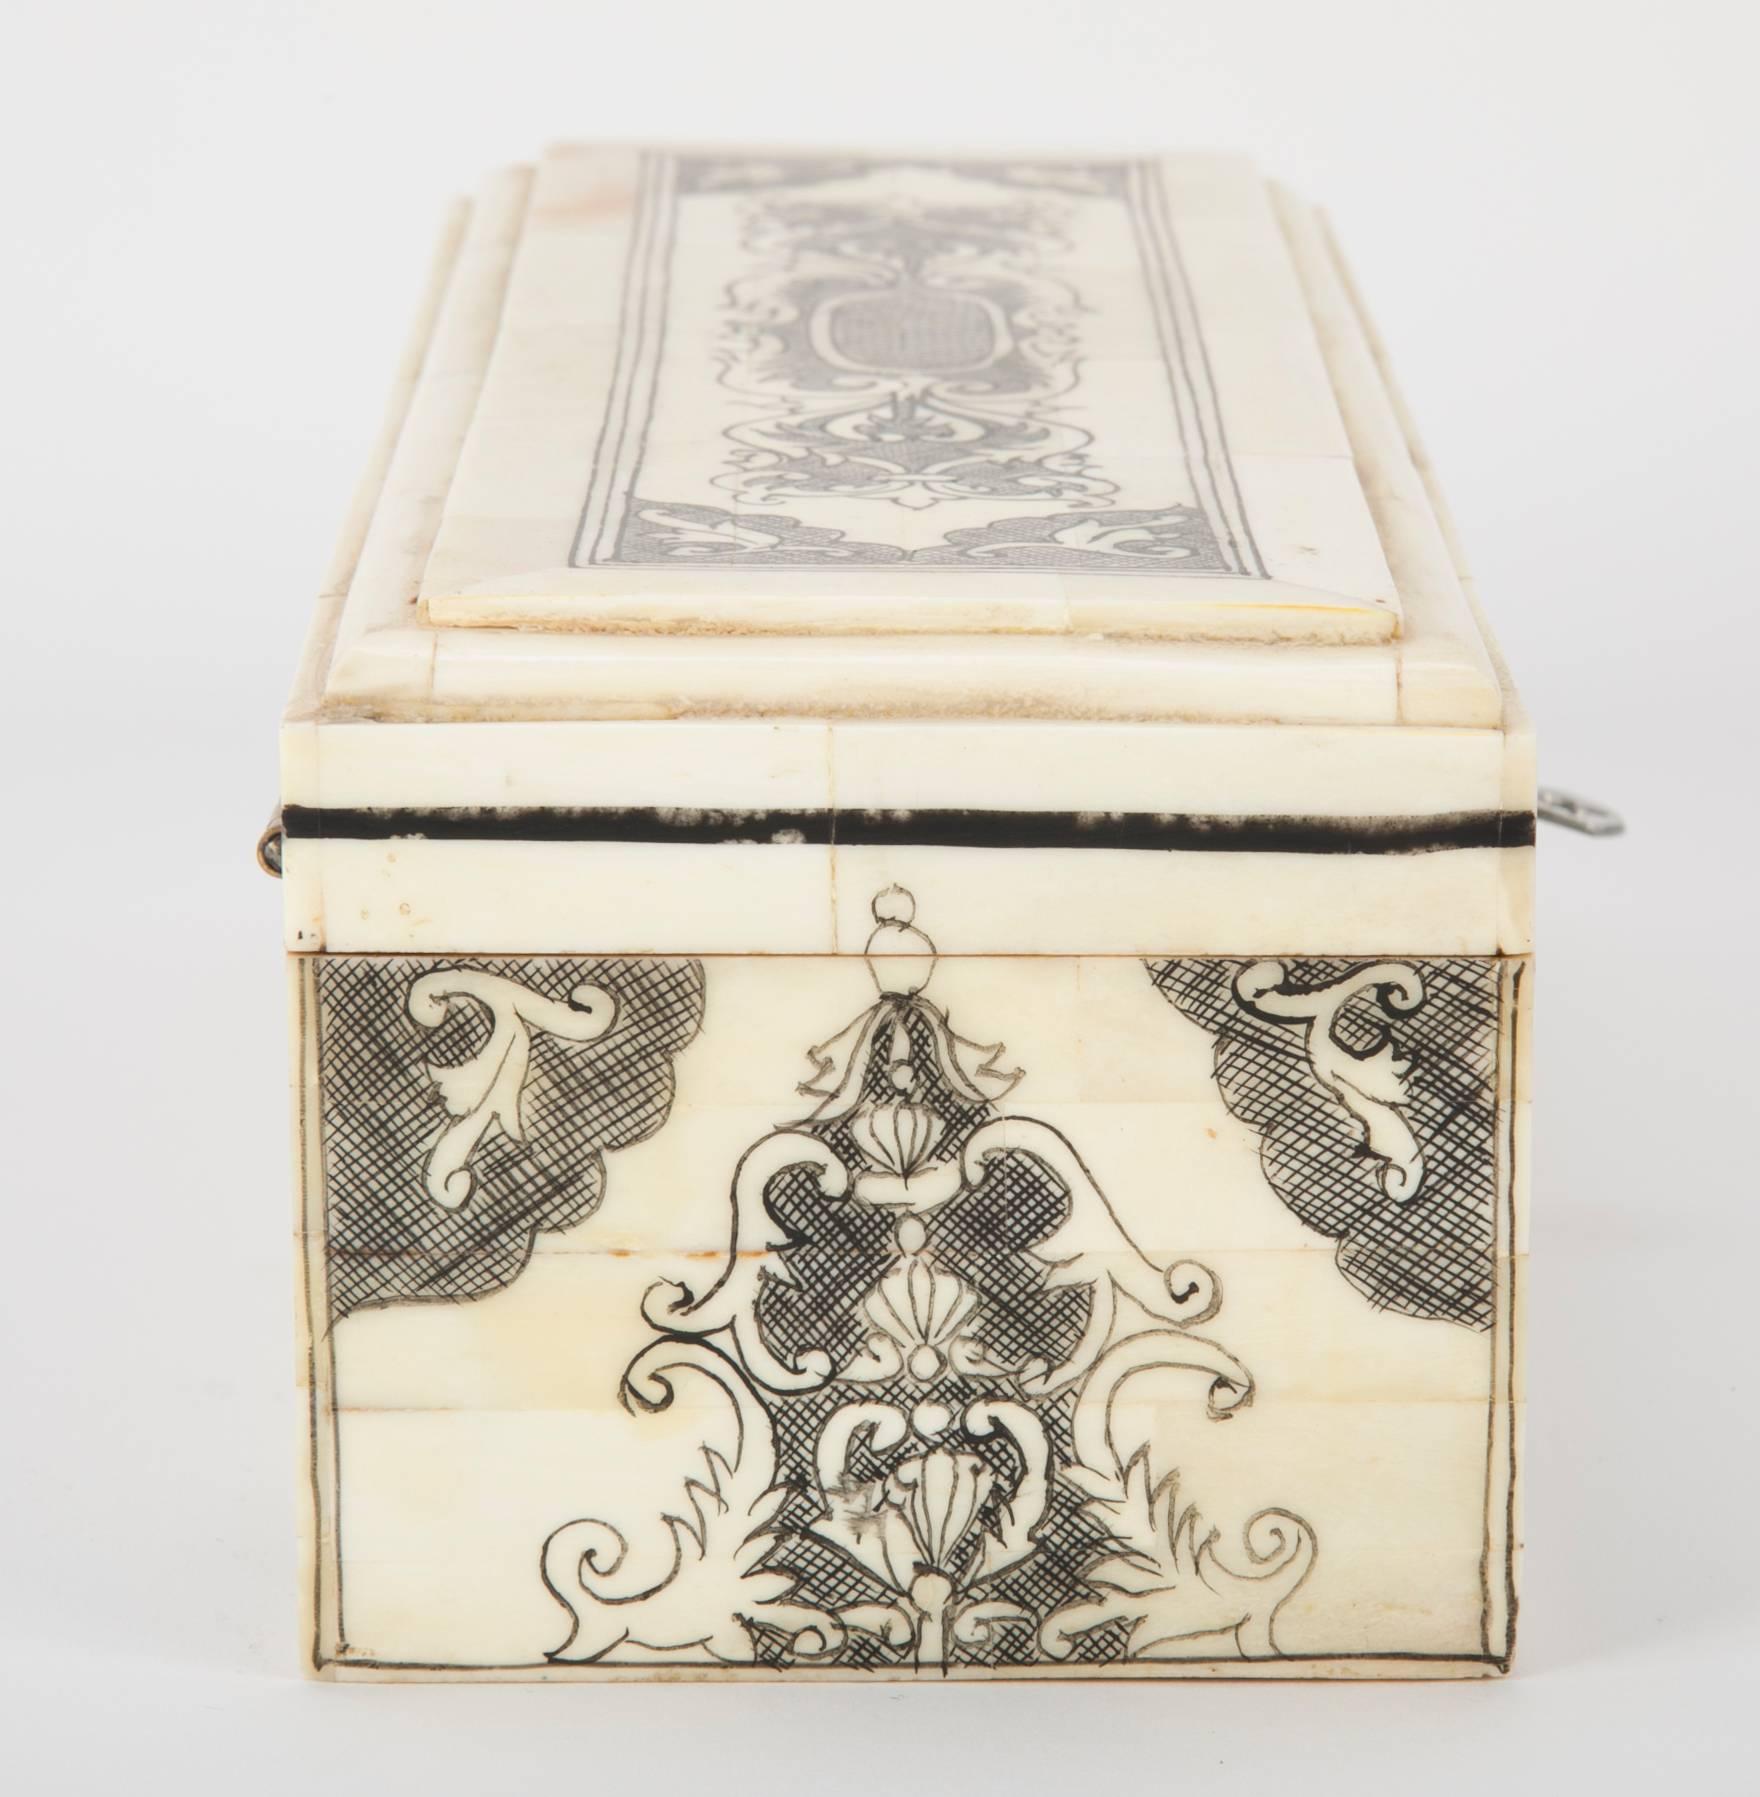 Anglo-Indian style pen box with camel bone veneer decorated in etched and inked designs. With key and single drawer on one side.